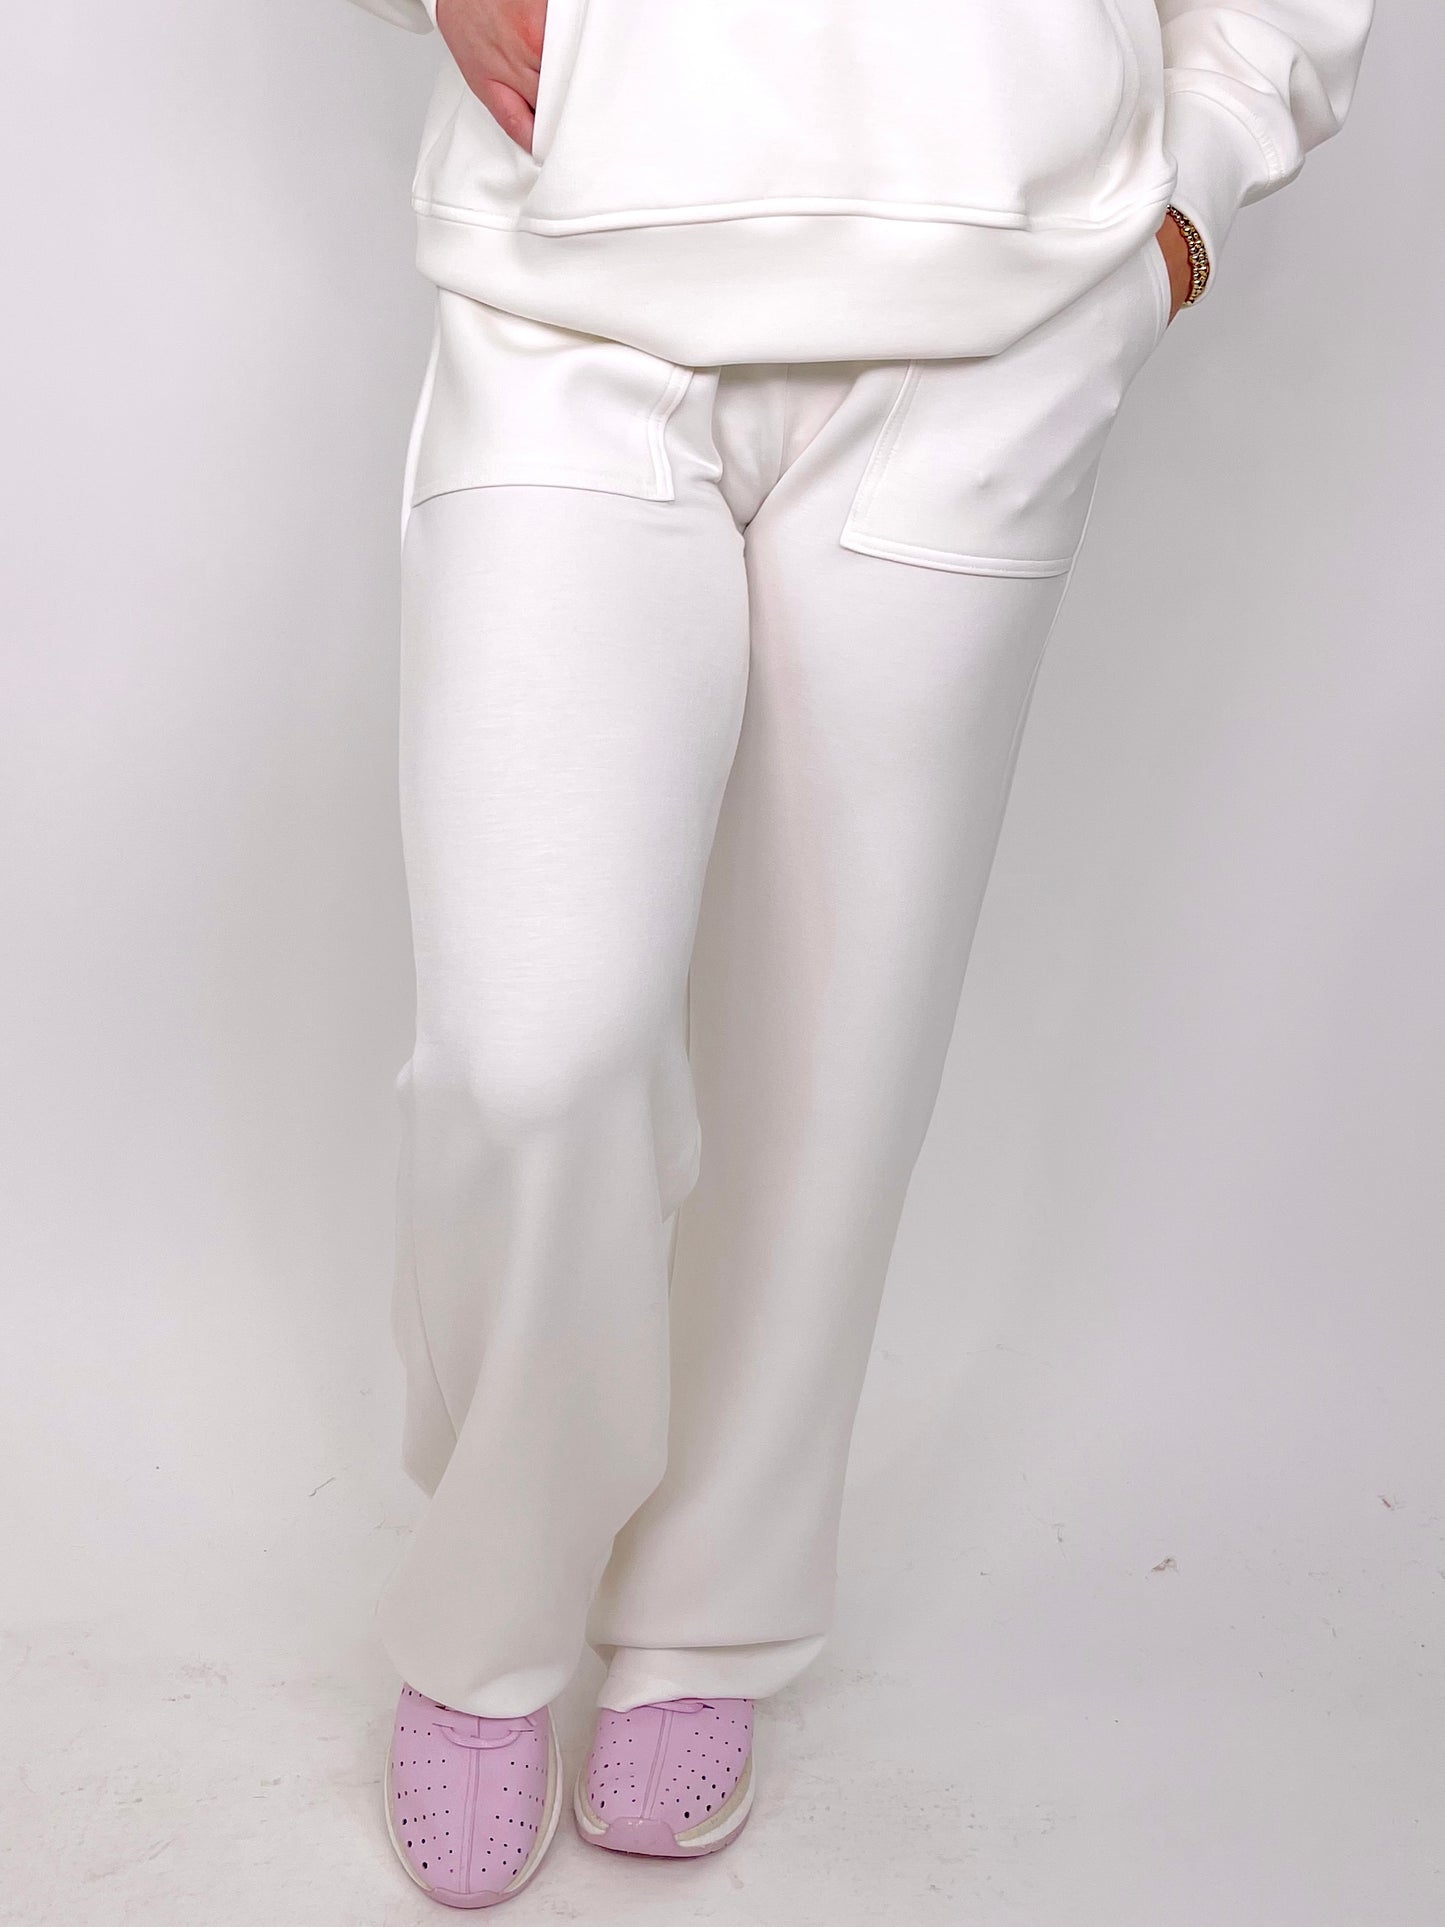 The Kaylie Bottoms-Lounge Pants-Rae Mode-The Village Shoppe, Women’s Fashion Boutique, Shop Online and In Store - Located in Muscle Shoals, AL.